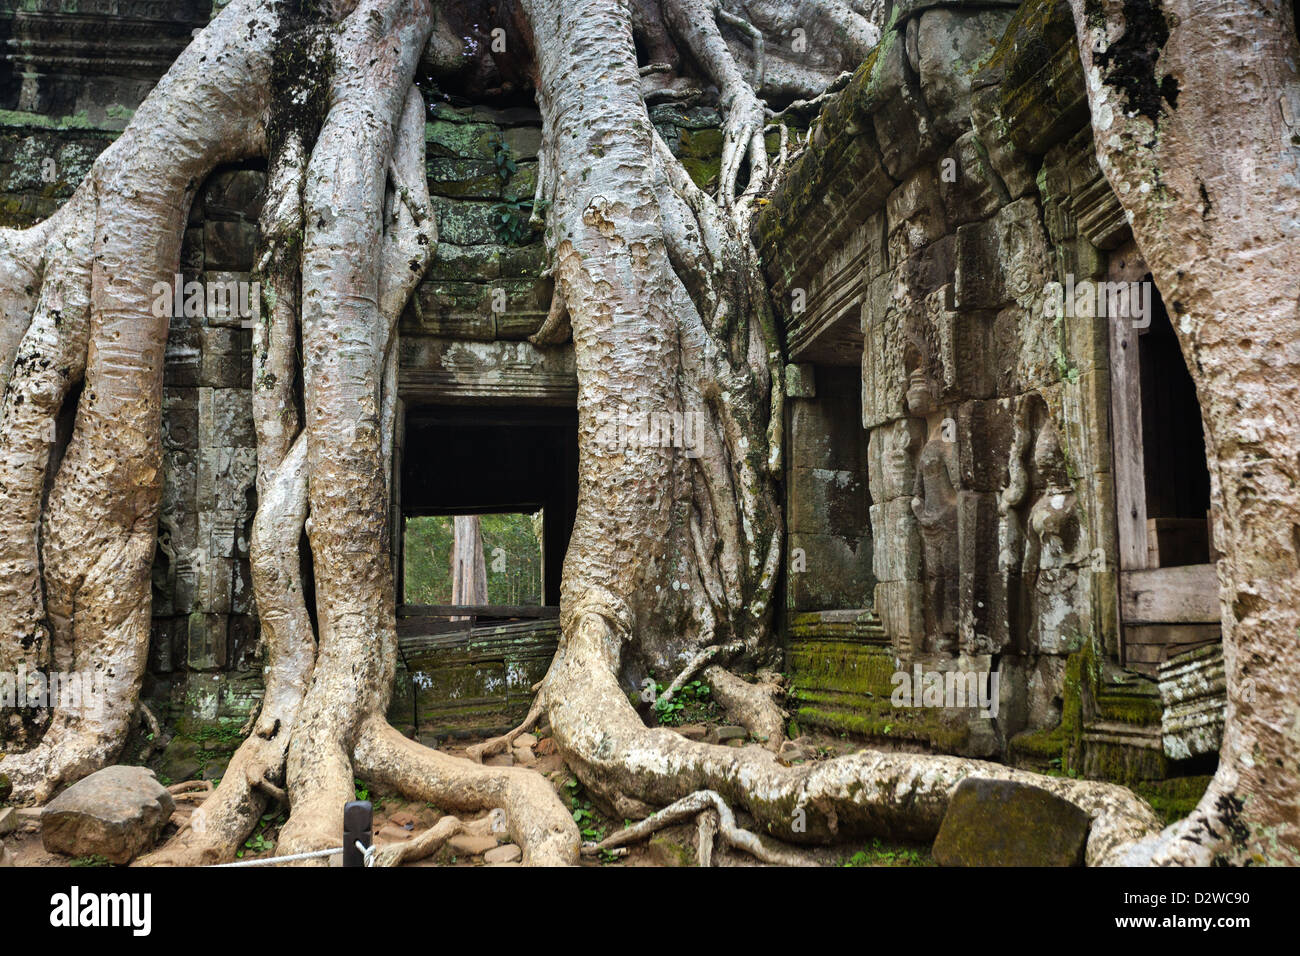 Tropical tree roots entangling Ta Prohm temple, Angkor, Cambodia Stock Photo